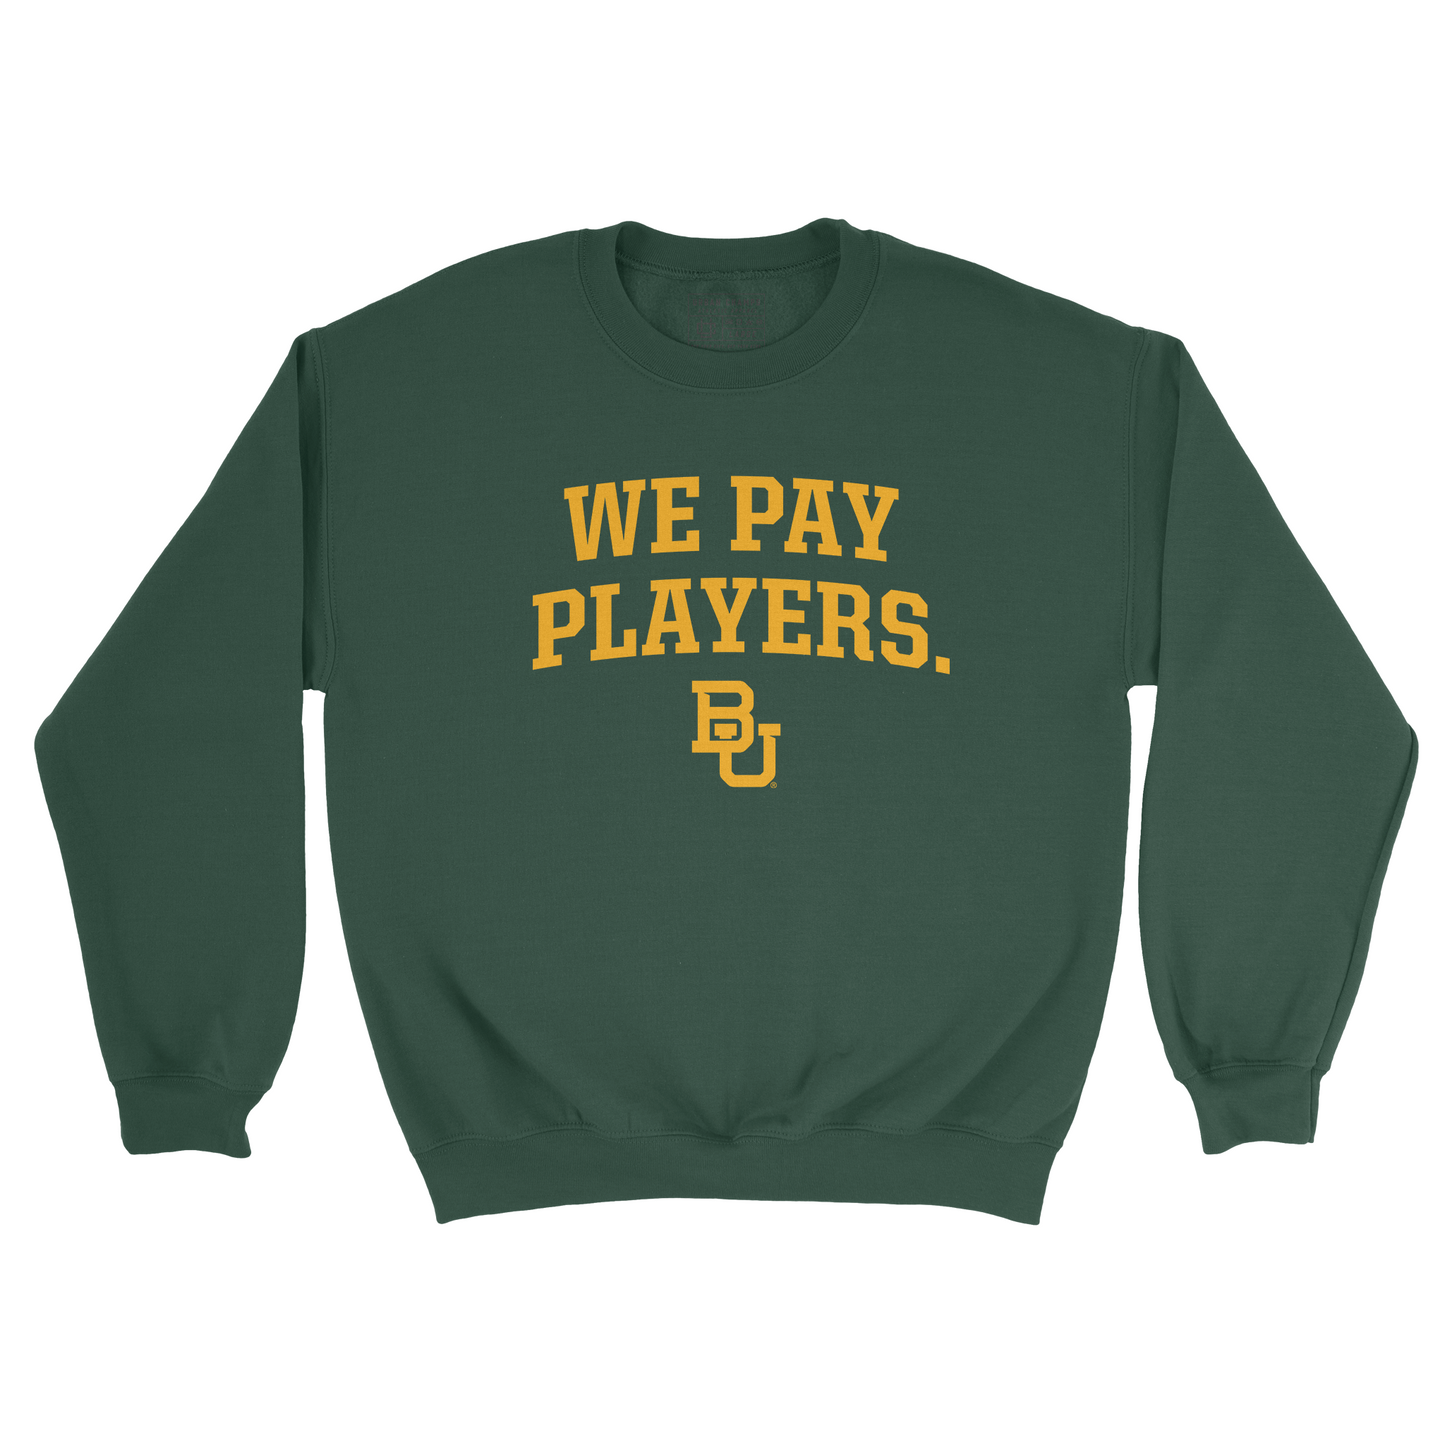 EXCLUSIVE RELEASE: Baylor 'We Pay Players' Crew